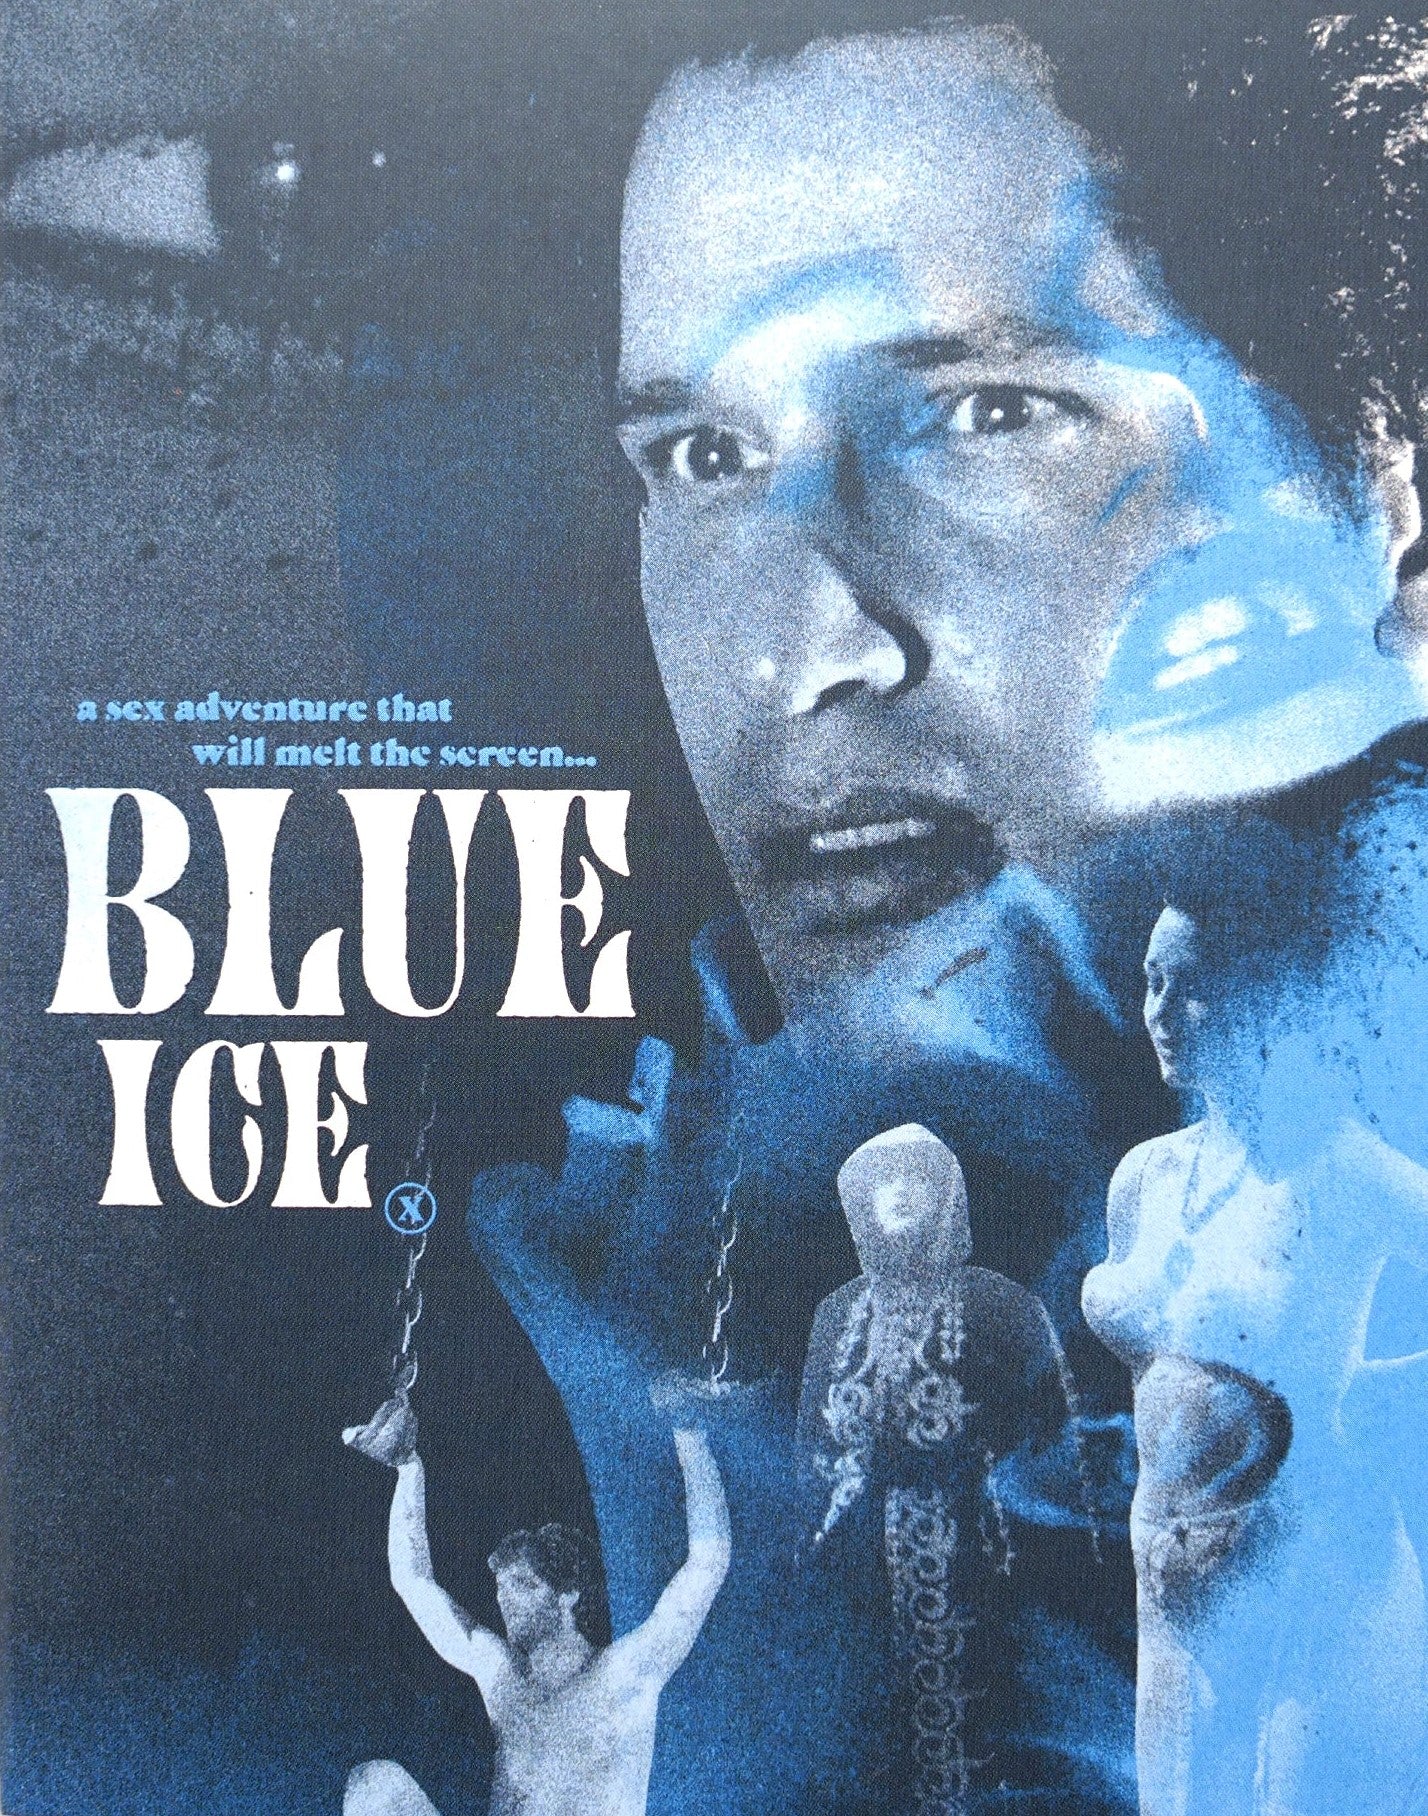 BLUE ICE (LIMITED EDITION) BLU-RAY/DVD